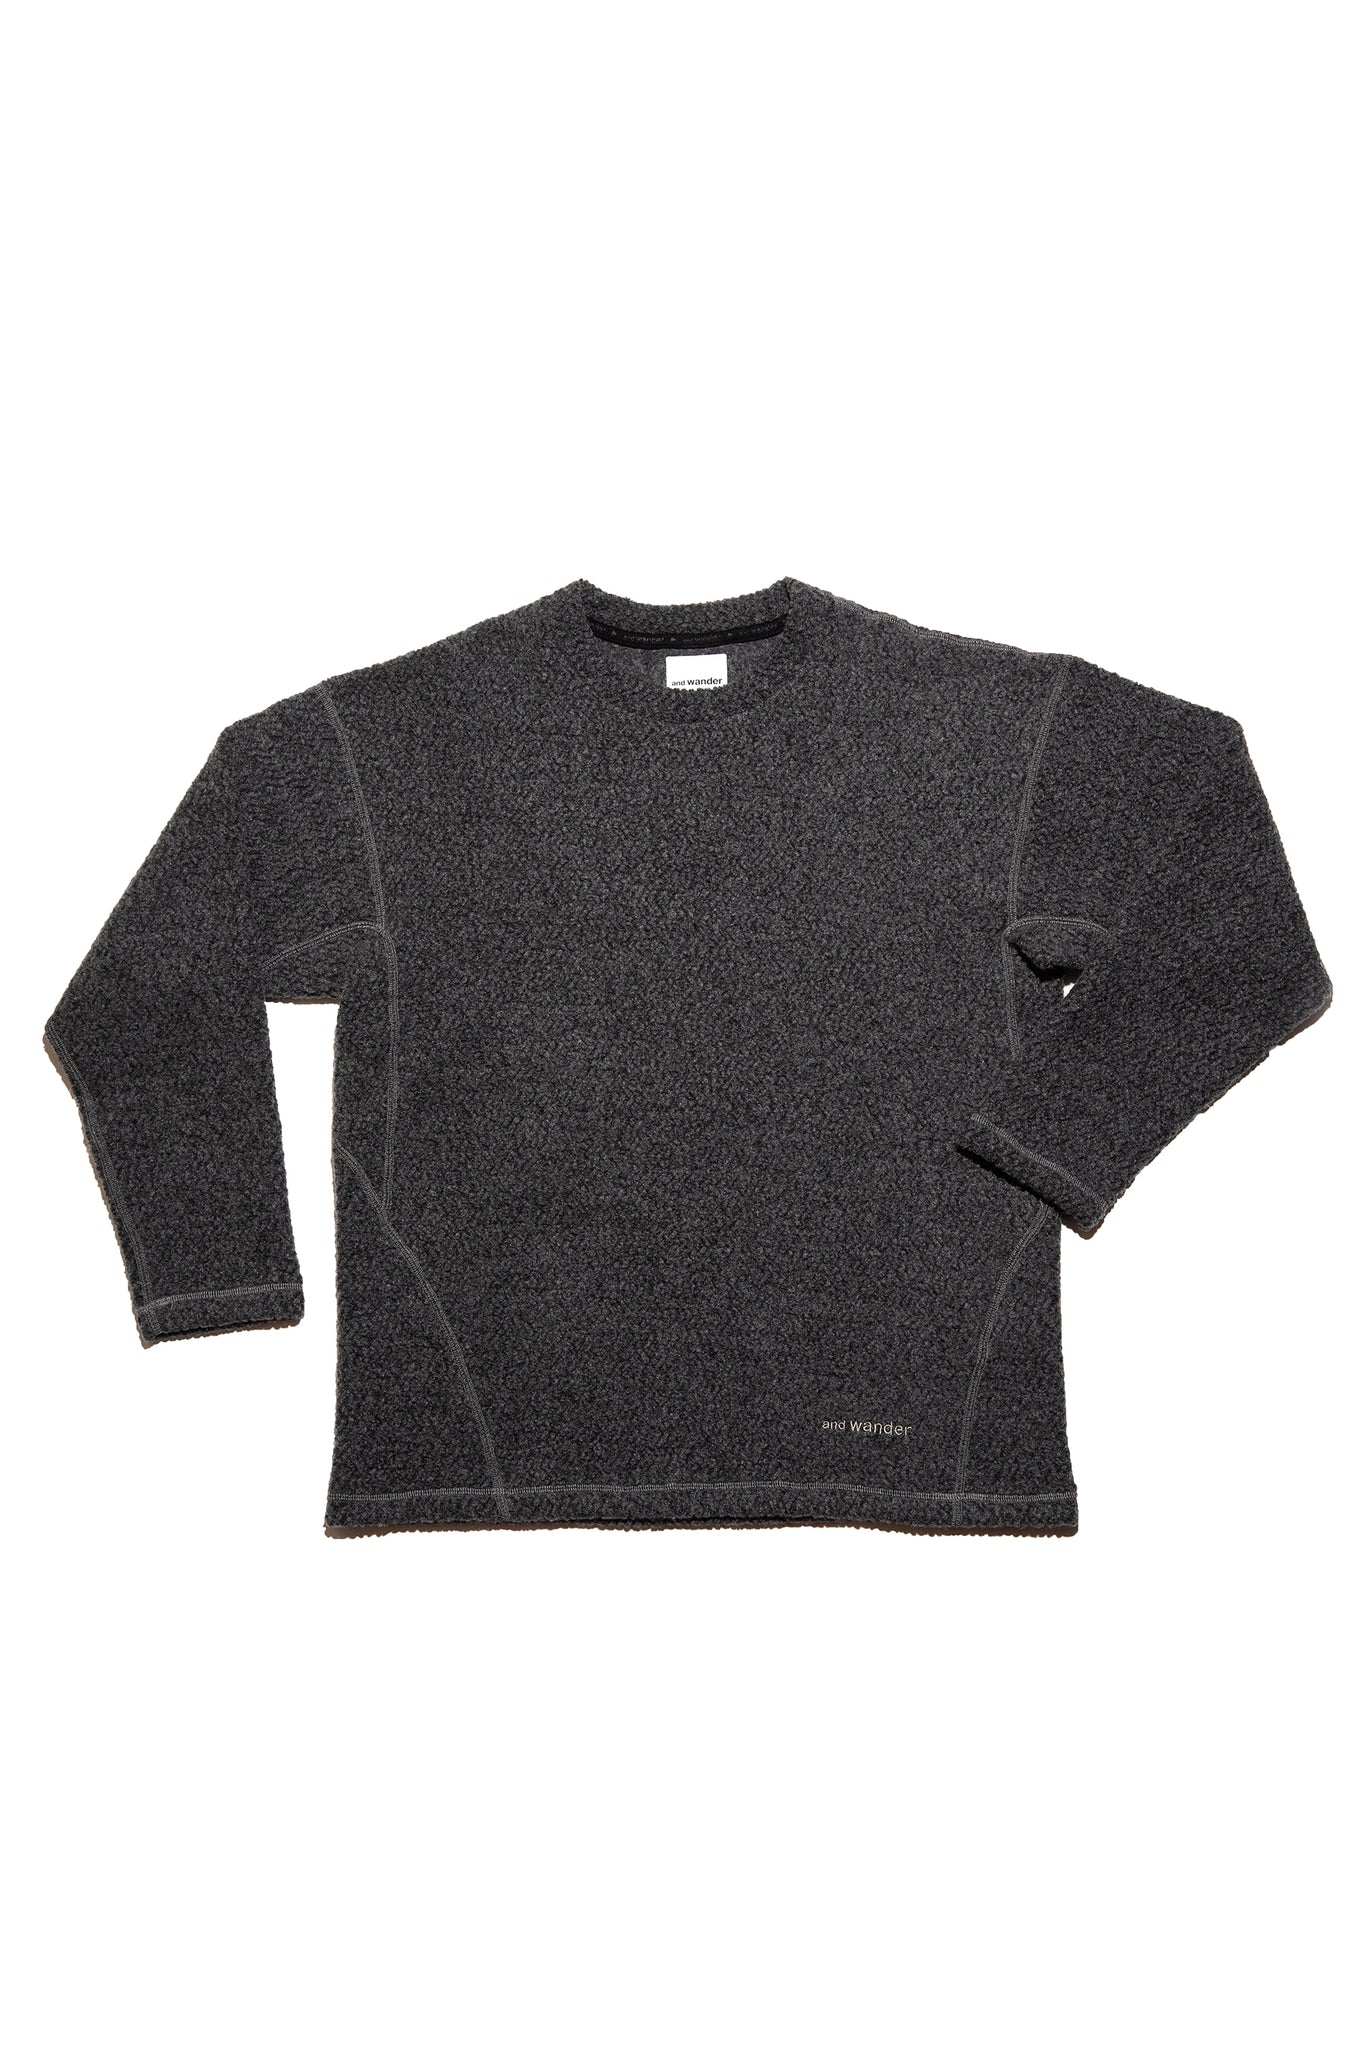 understory-shop - AND WANDER - RE WOOL JQ CREW NECK